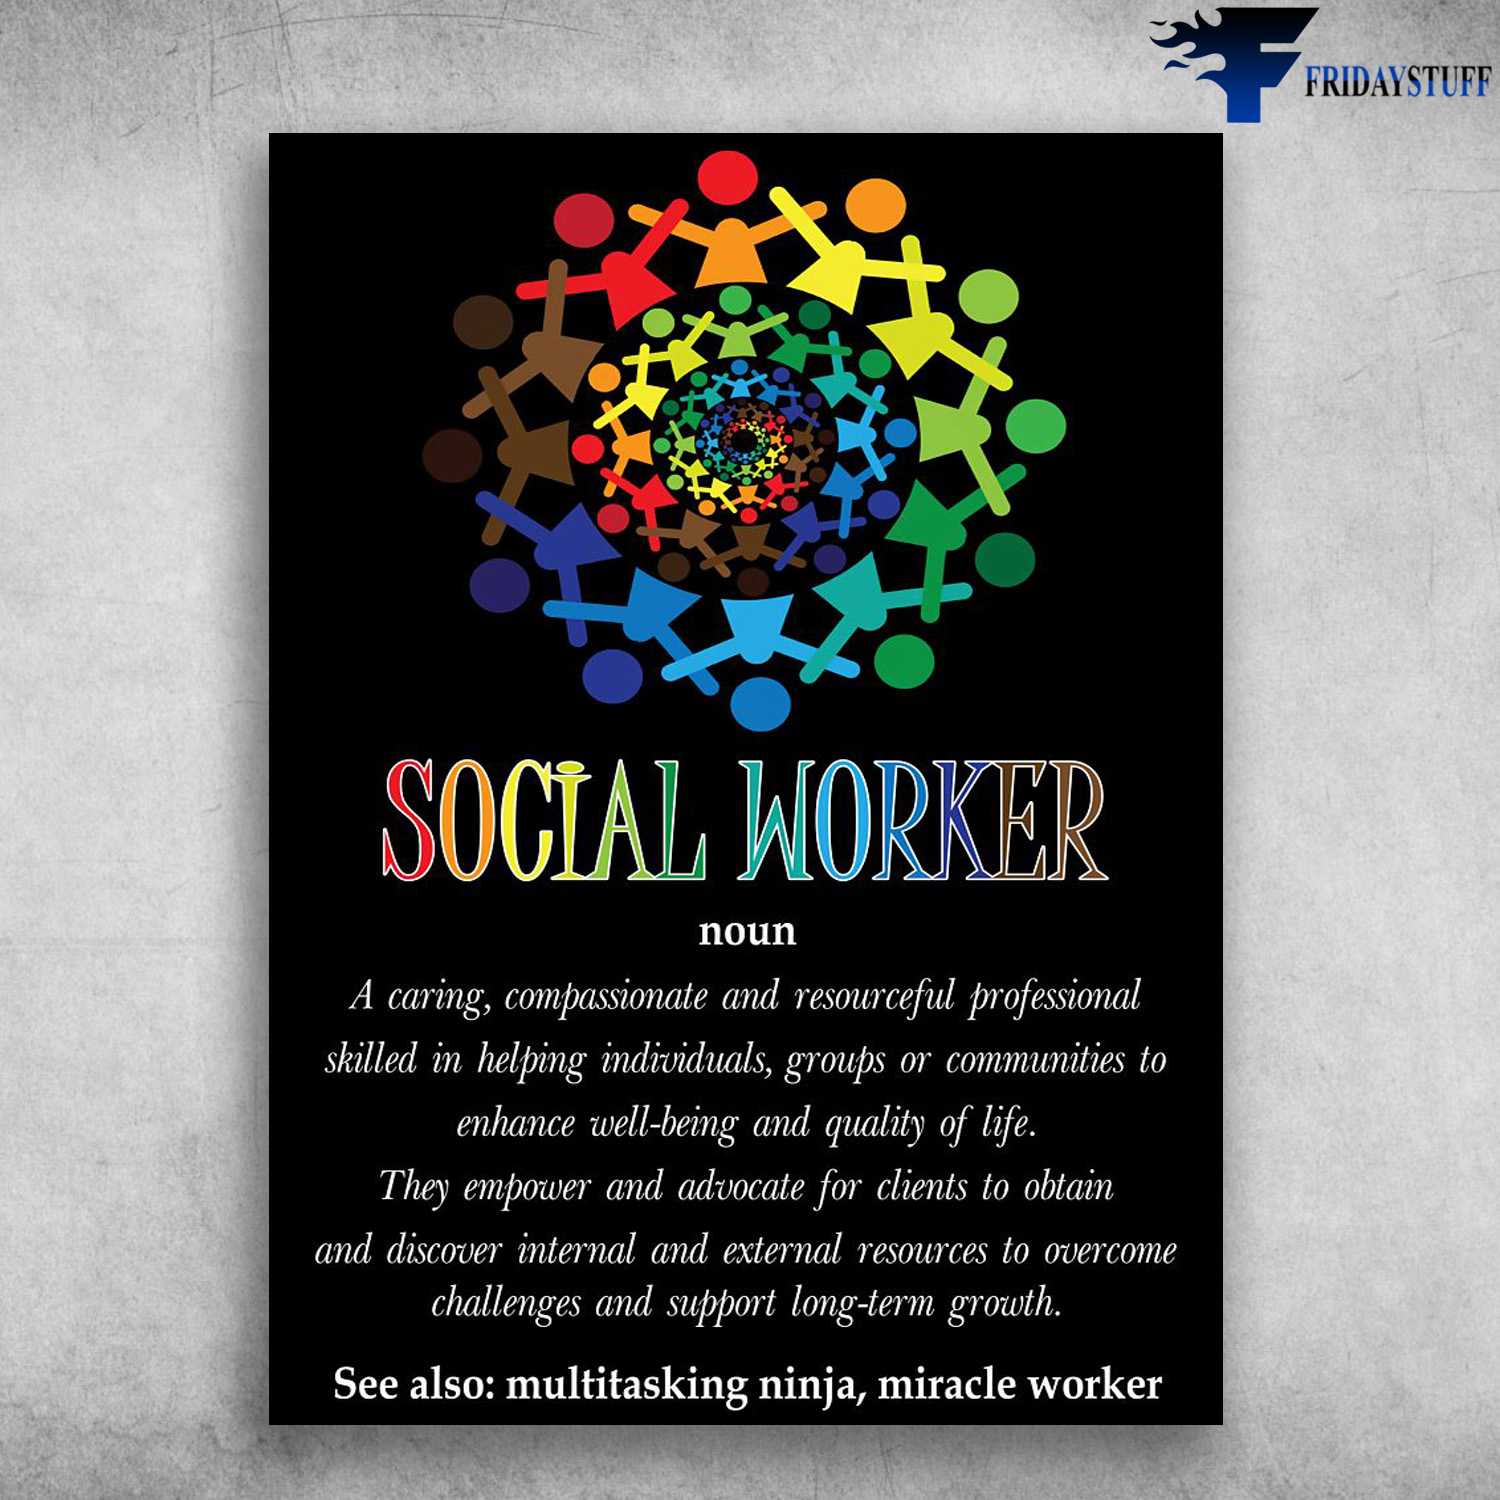 Social Worker, Social Worker Definition, A Carring, Compassionate And Resourceful Professional Skilled, In Helping Individuals, Groups Or Communities, To Enhance Well-Being And Quality Life